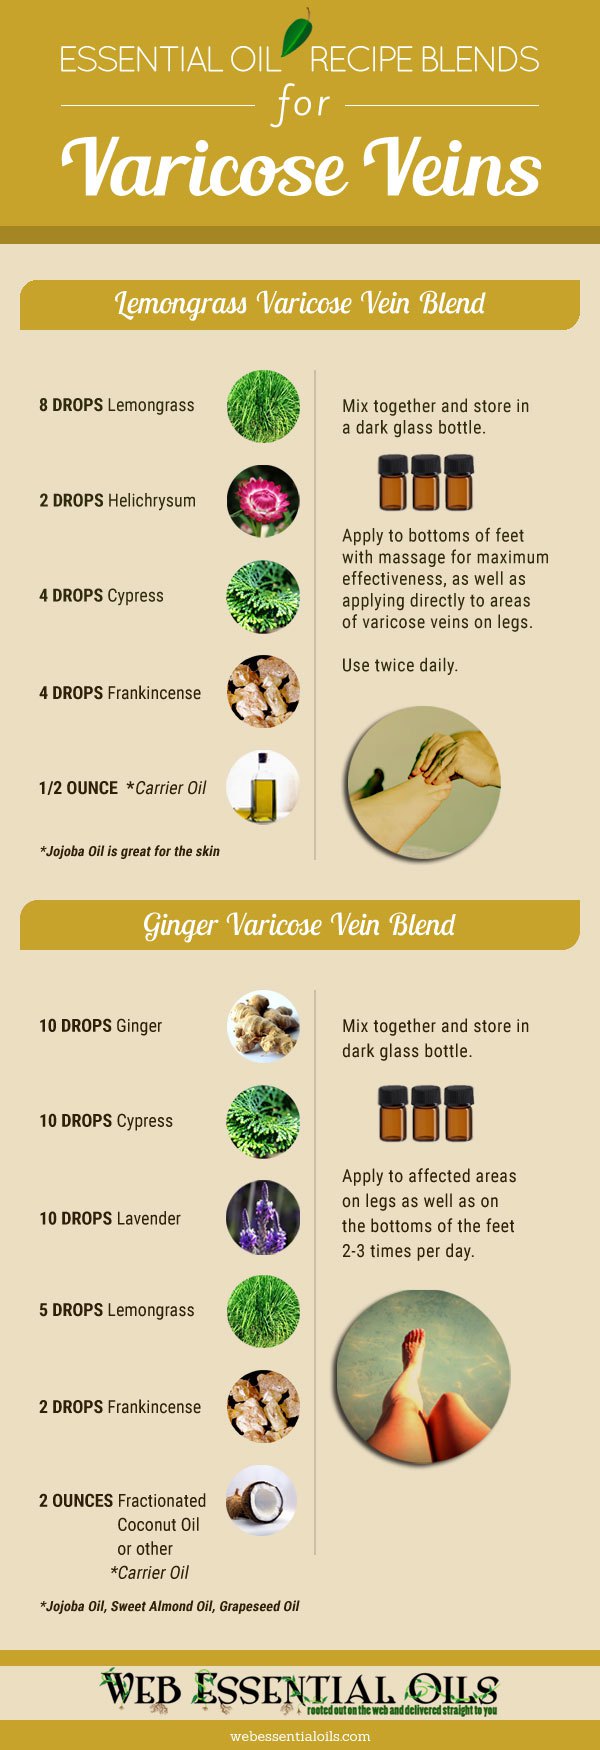 Essential Oil Recipes For Treating Varicose Veins At Home Infographic